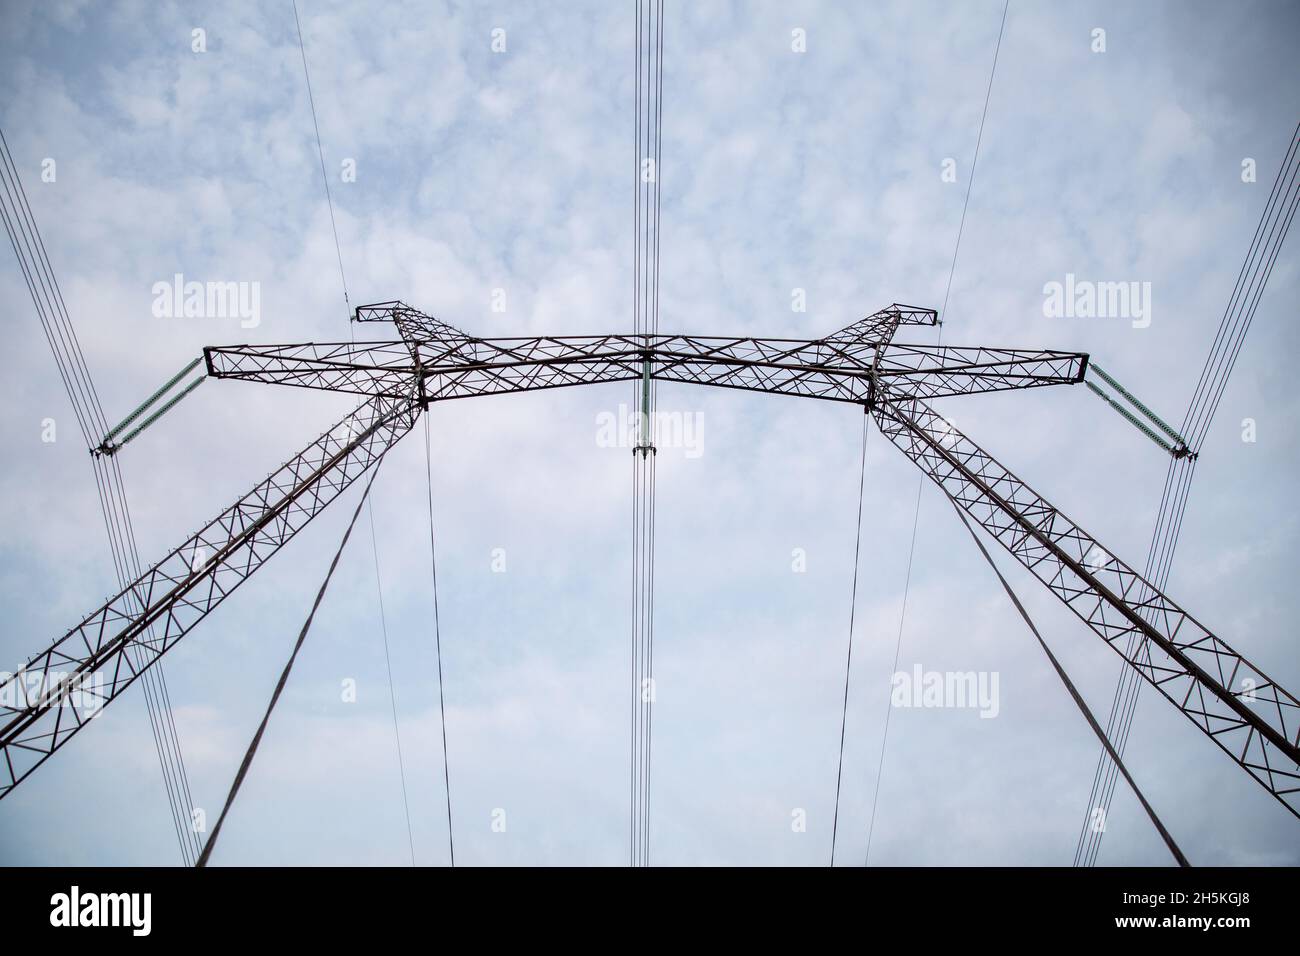 Power transmission lines against a blue sky. Stock Photo